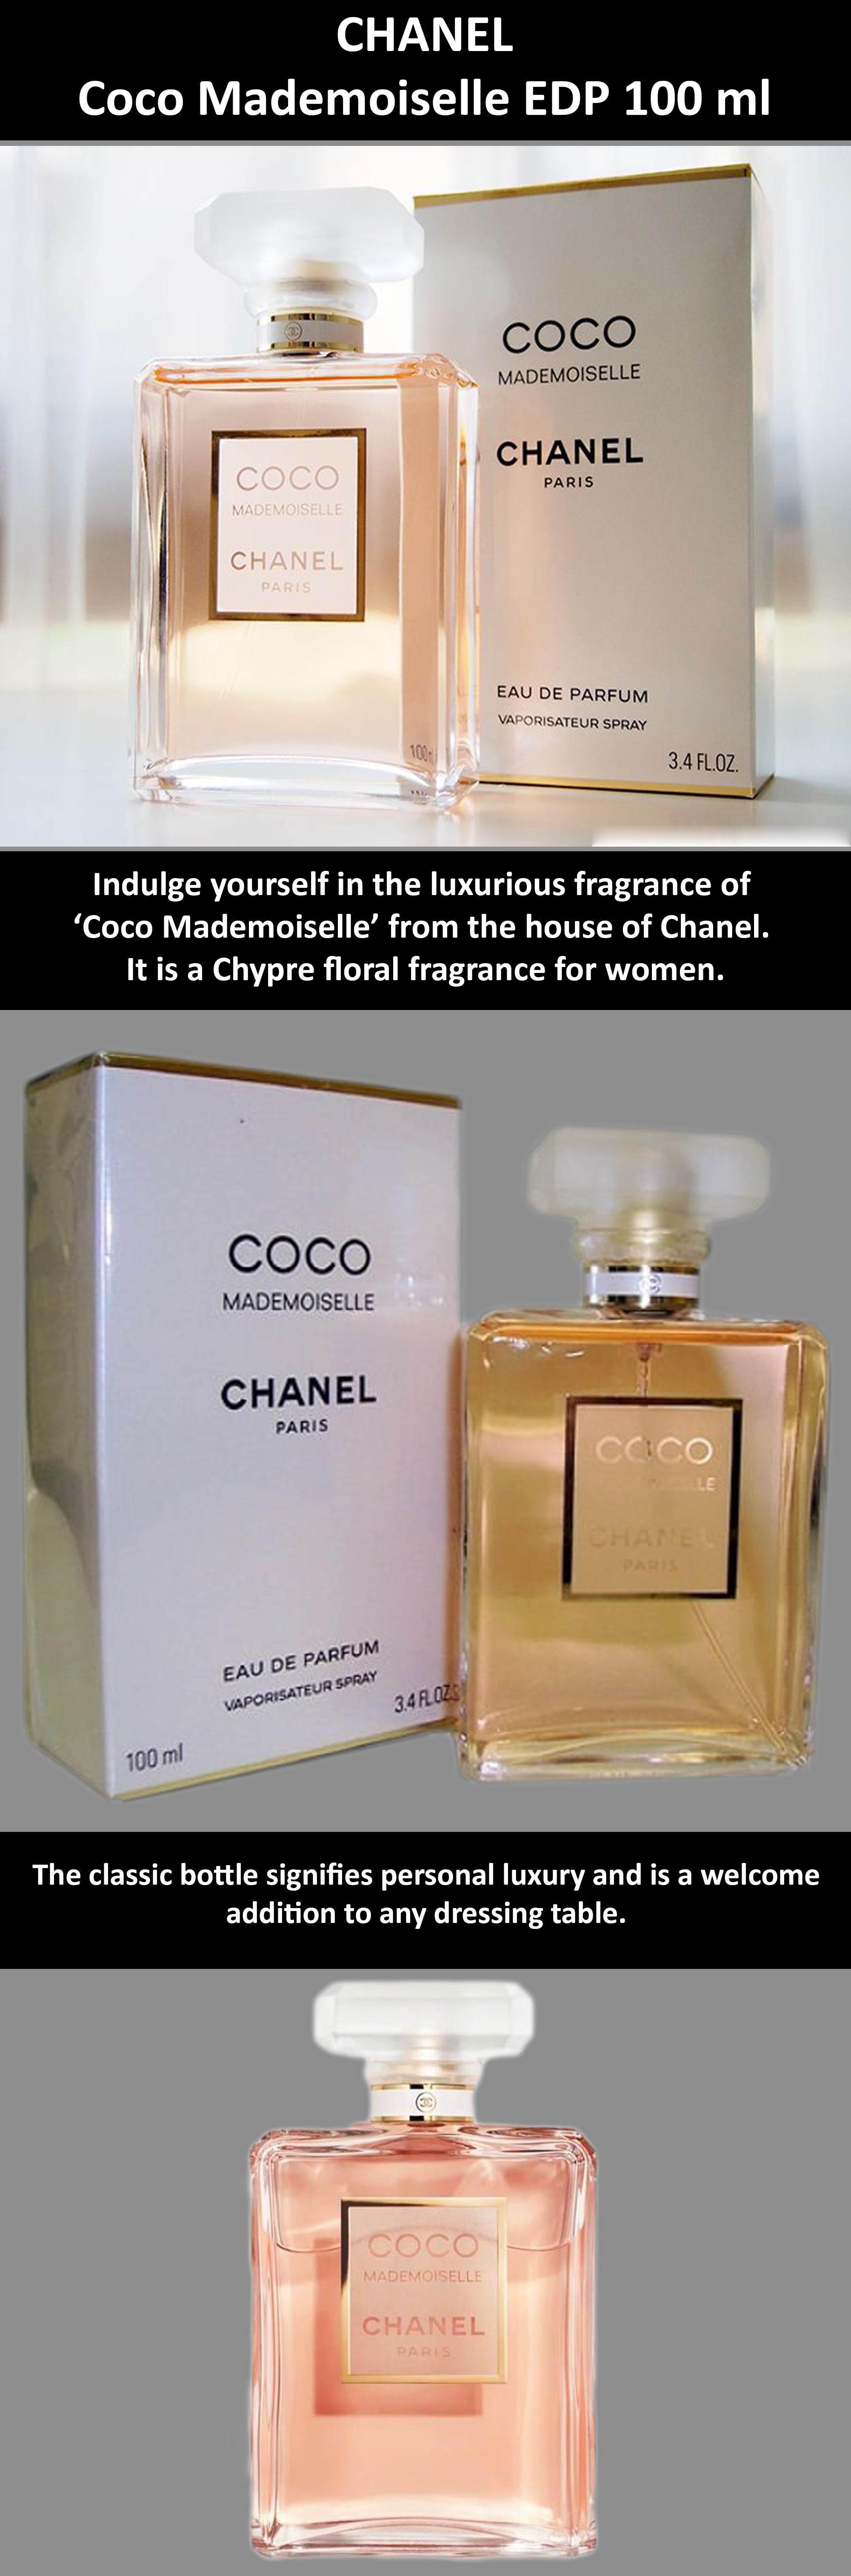 Chanel Coco Mademoiselle Fresh Hair Mist, 35 ml: Buy Online at Best Price  in Egypt - Souq is now